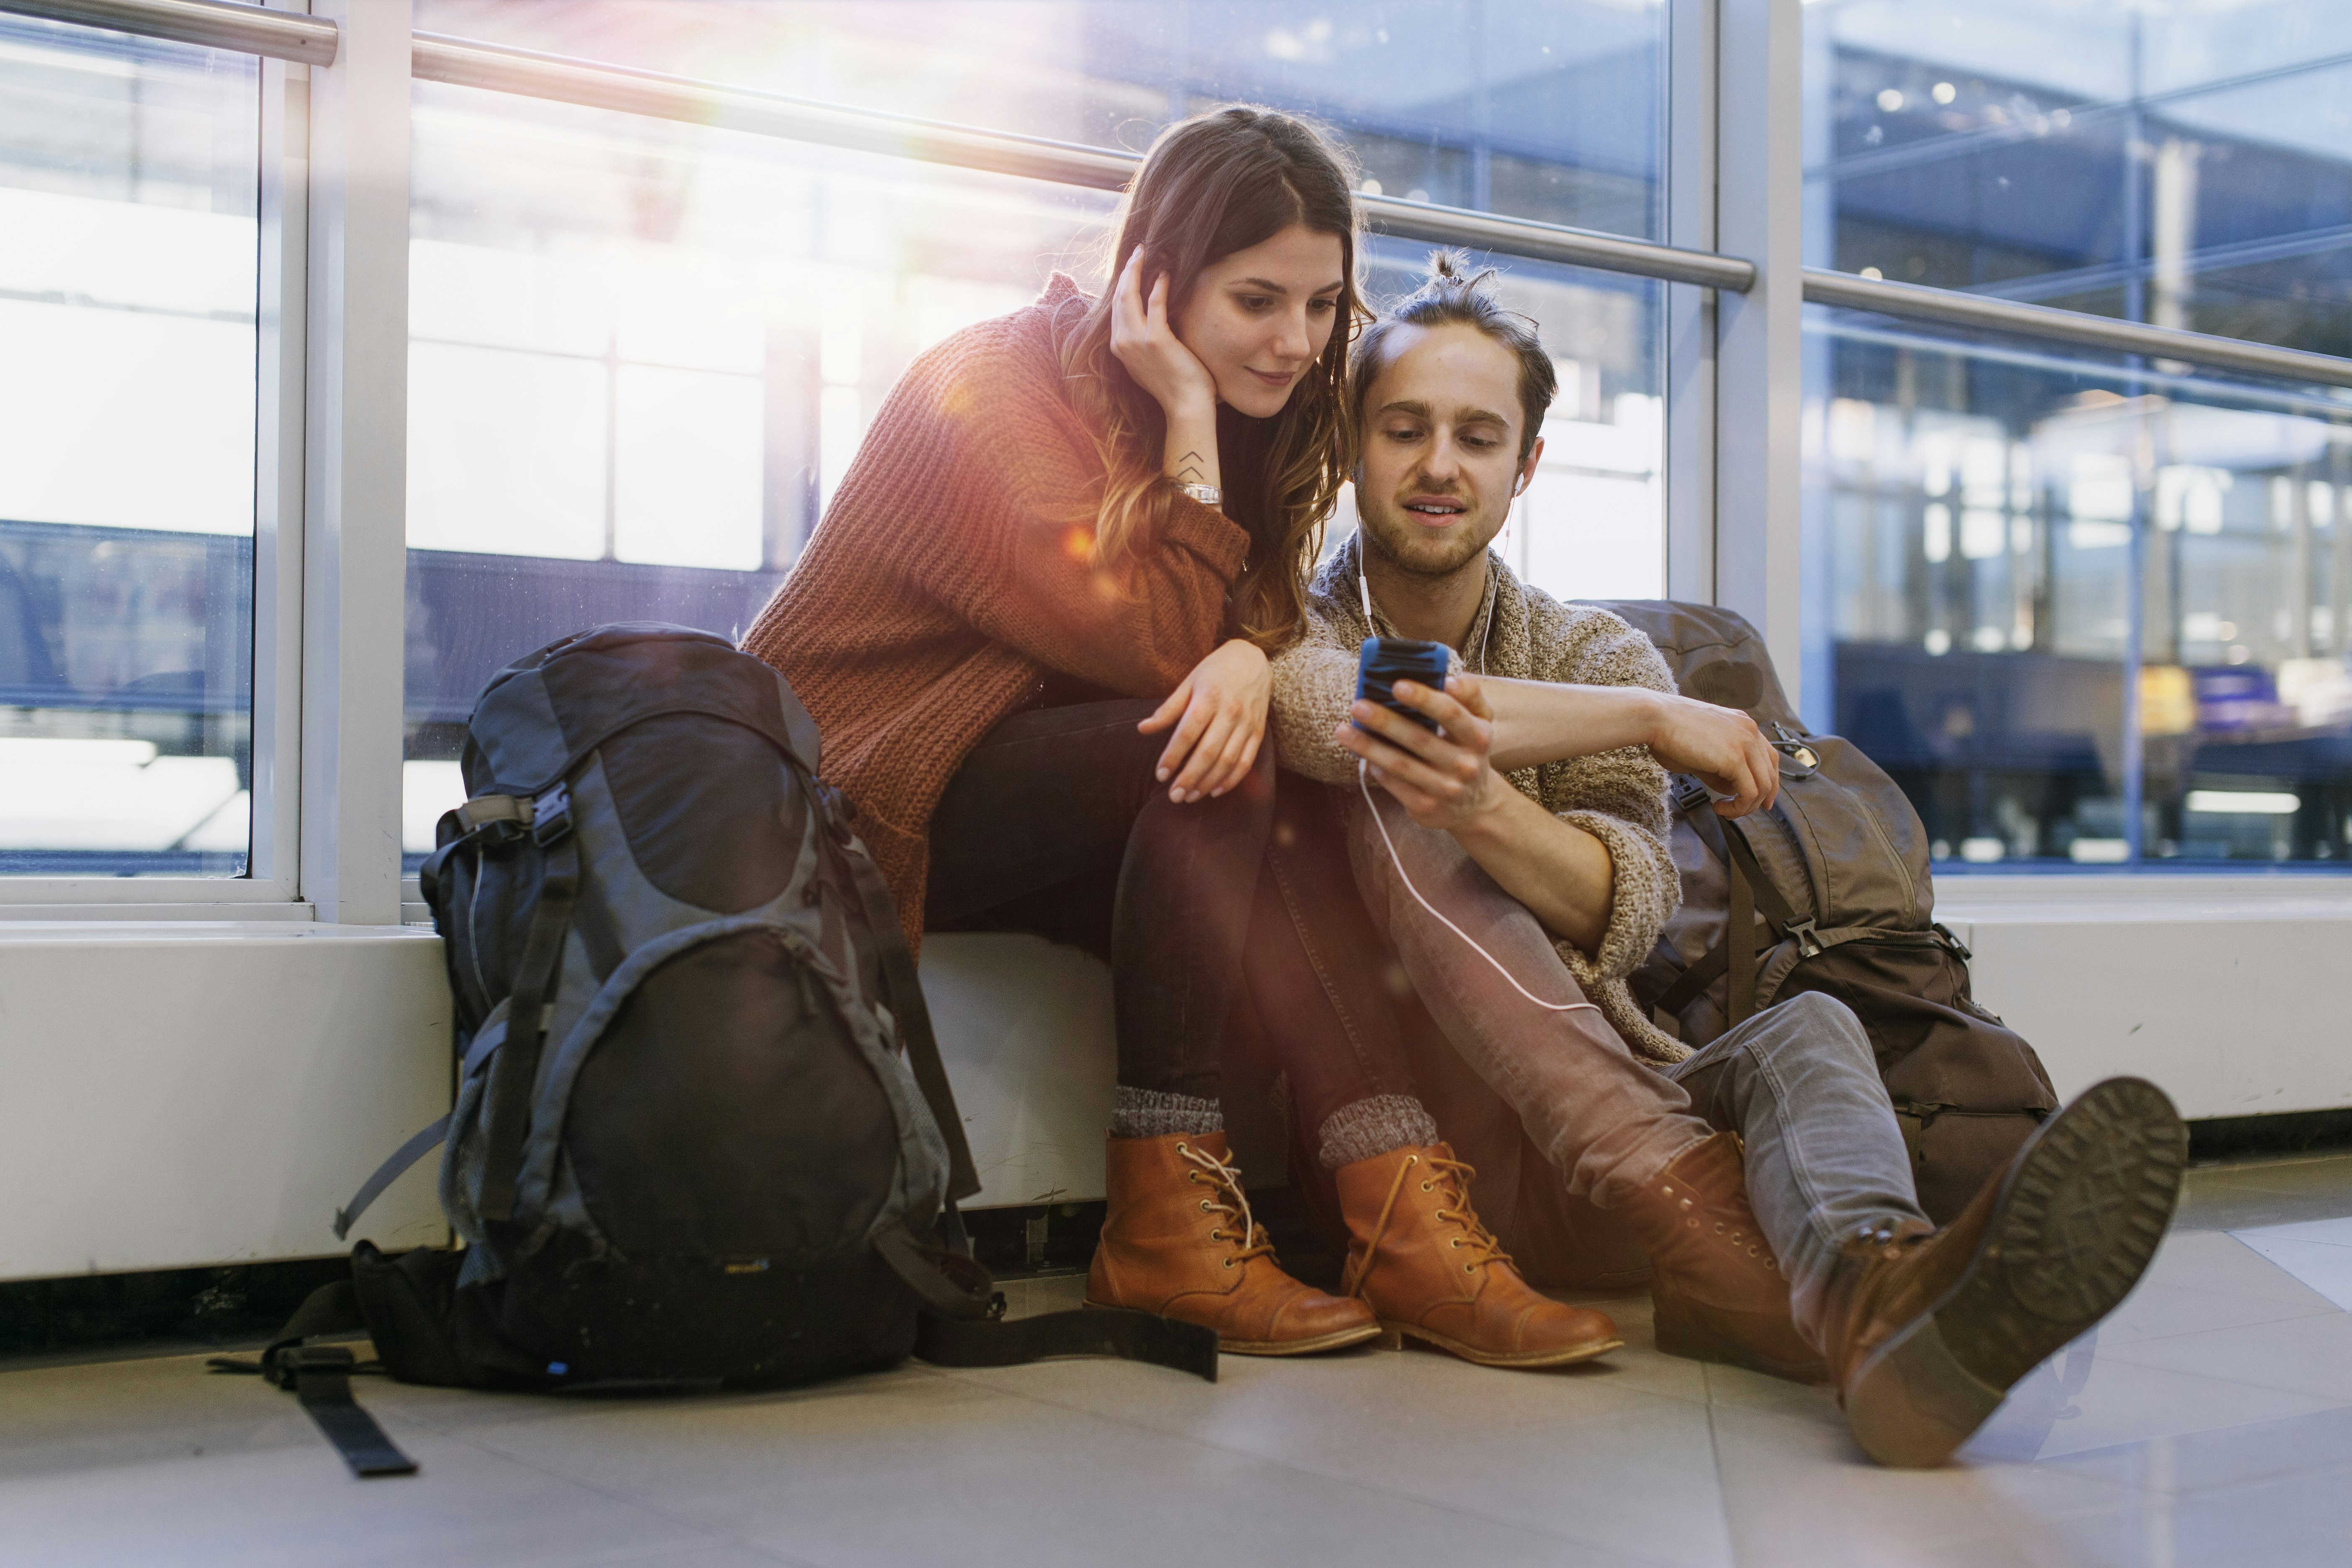 A young couple sitting on the floor in an airport terminal, passing time by watching something on a mobile phone. 